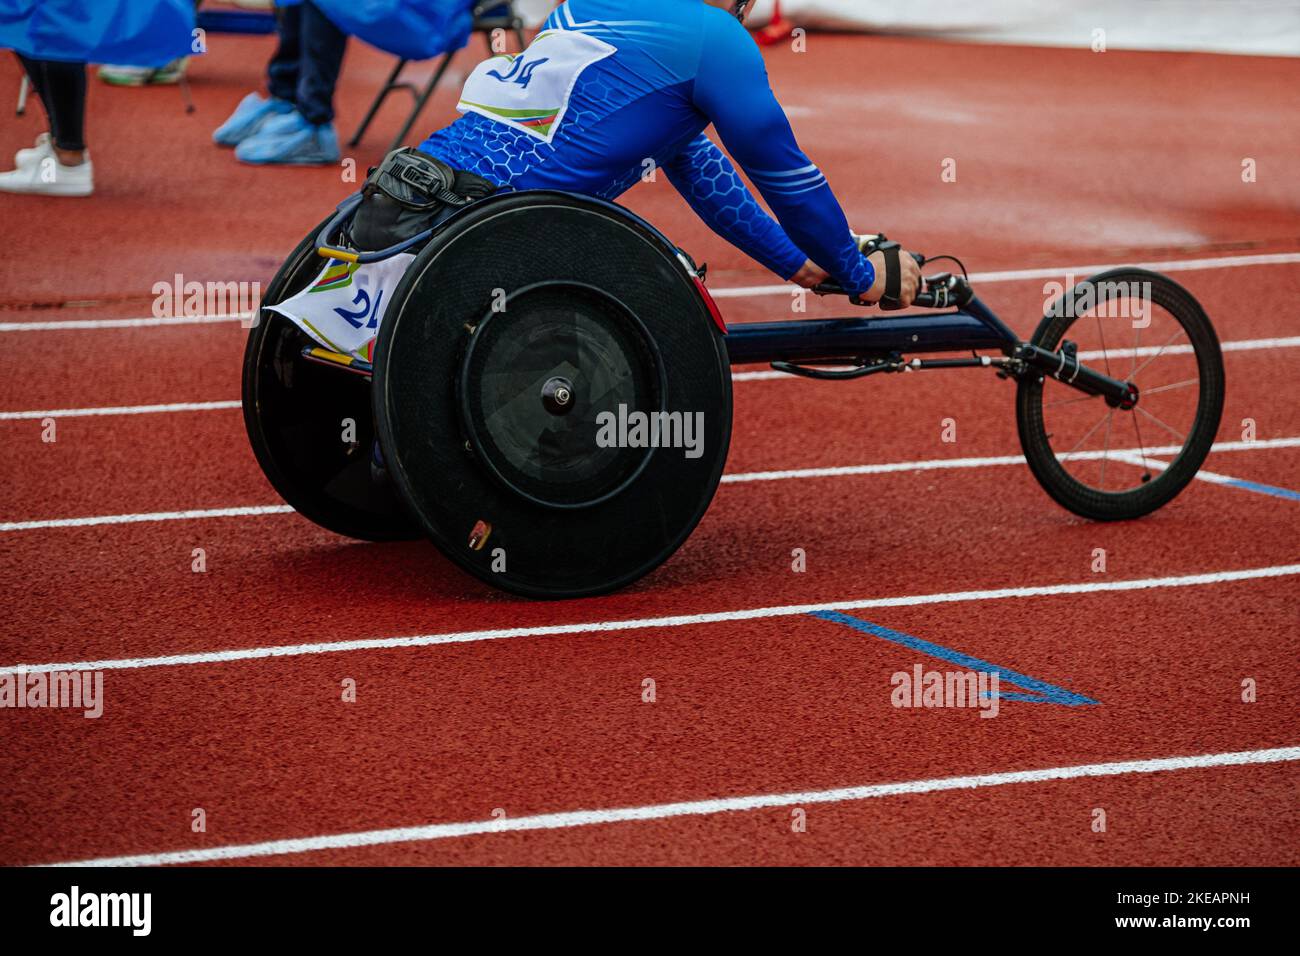 male athlete in wheelchair racing competition at stadium Stock Photo